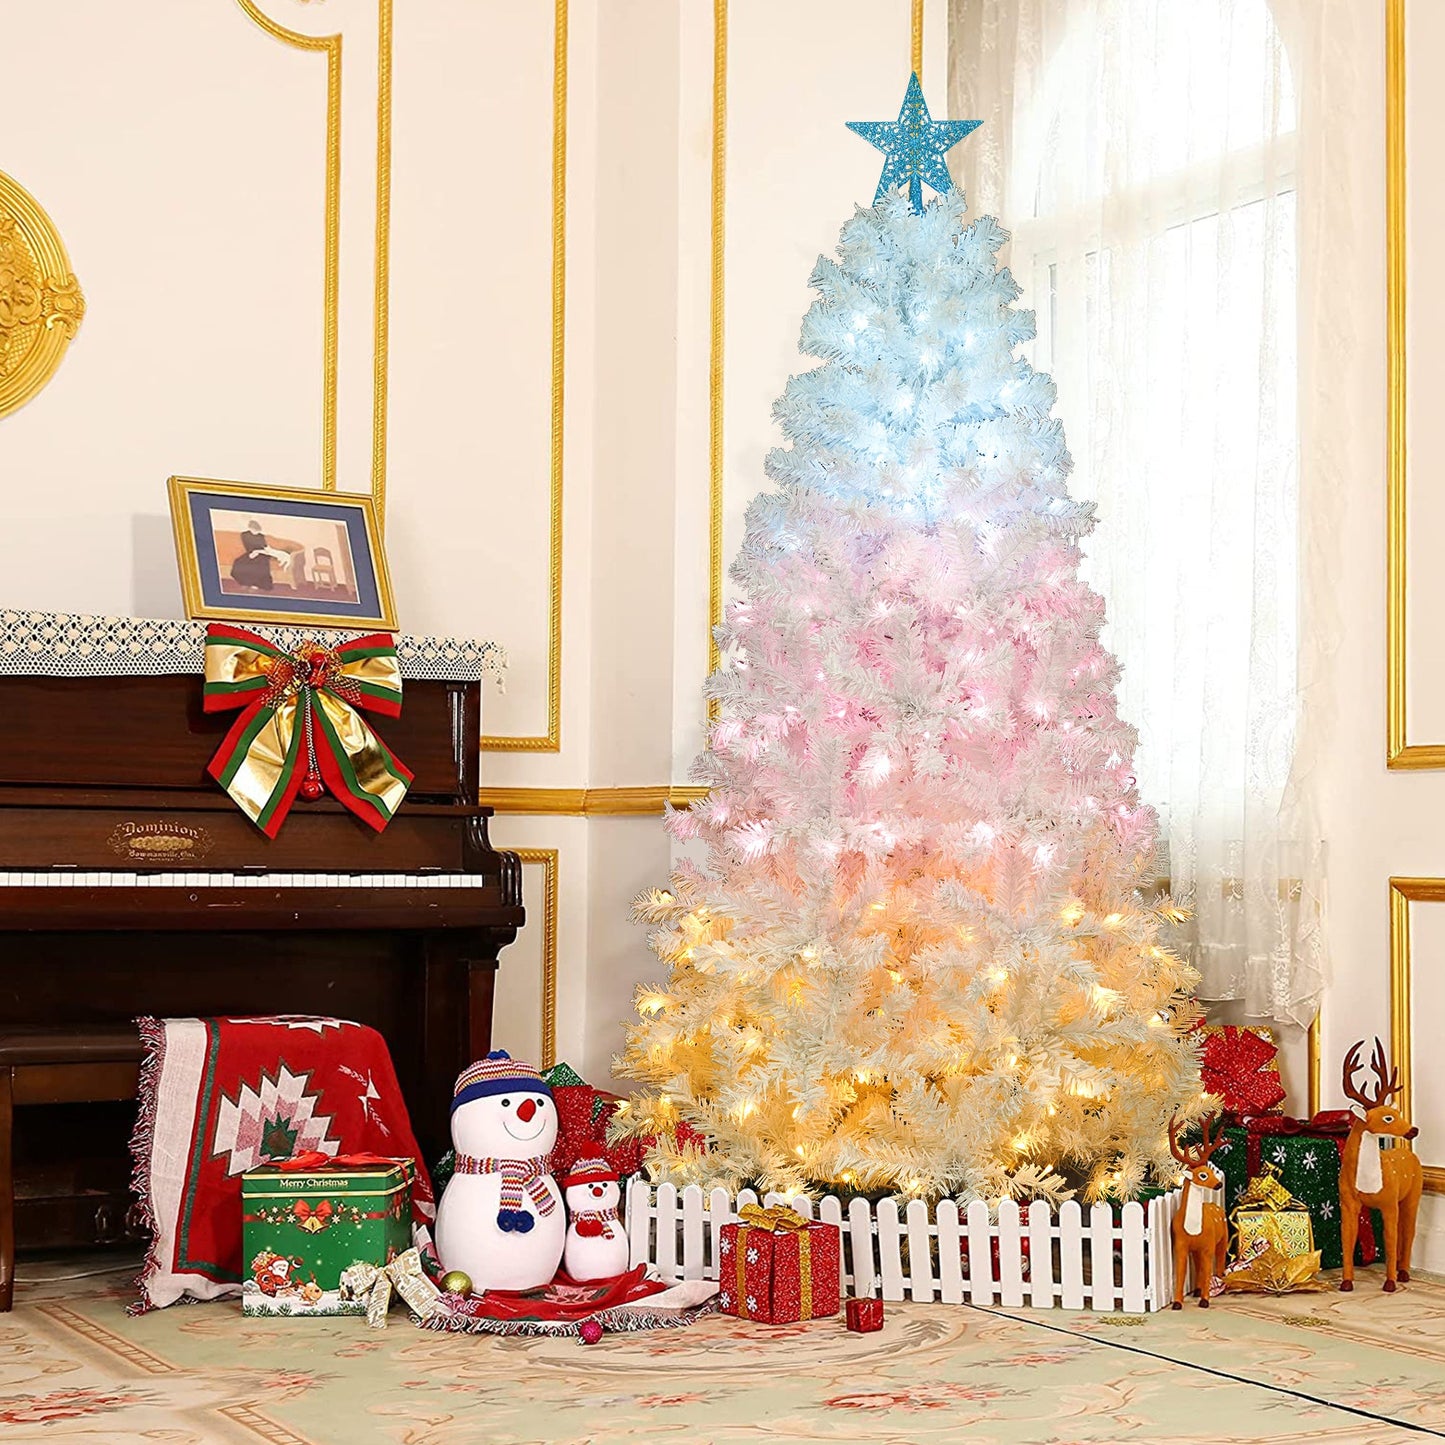 6ft Artificial Christmas Tree with 300 LED Lights and 600 Bendable